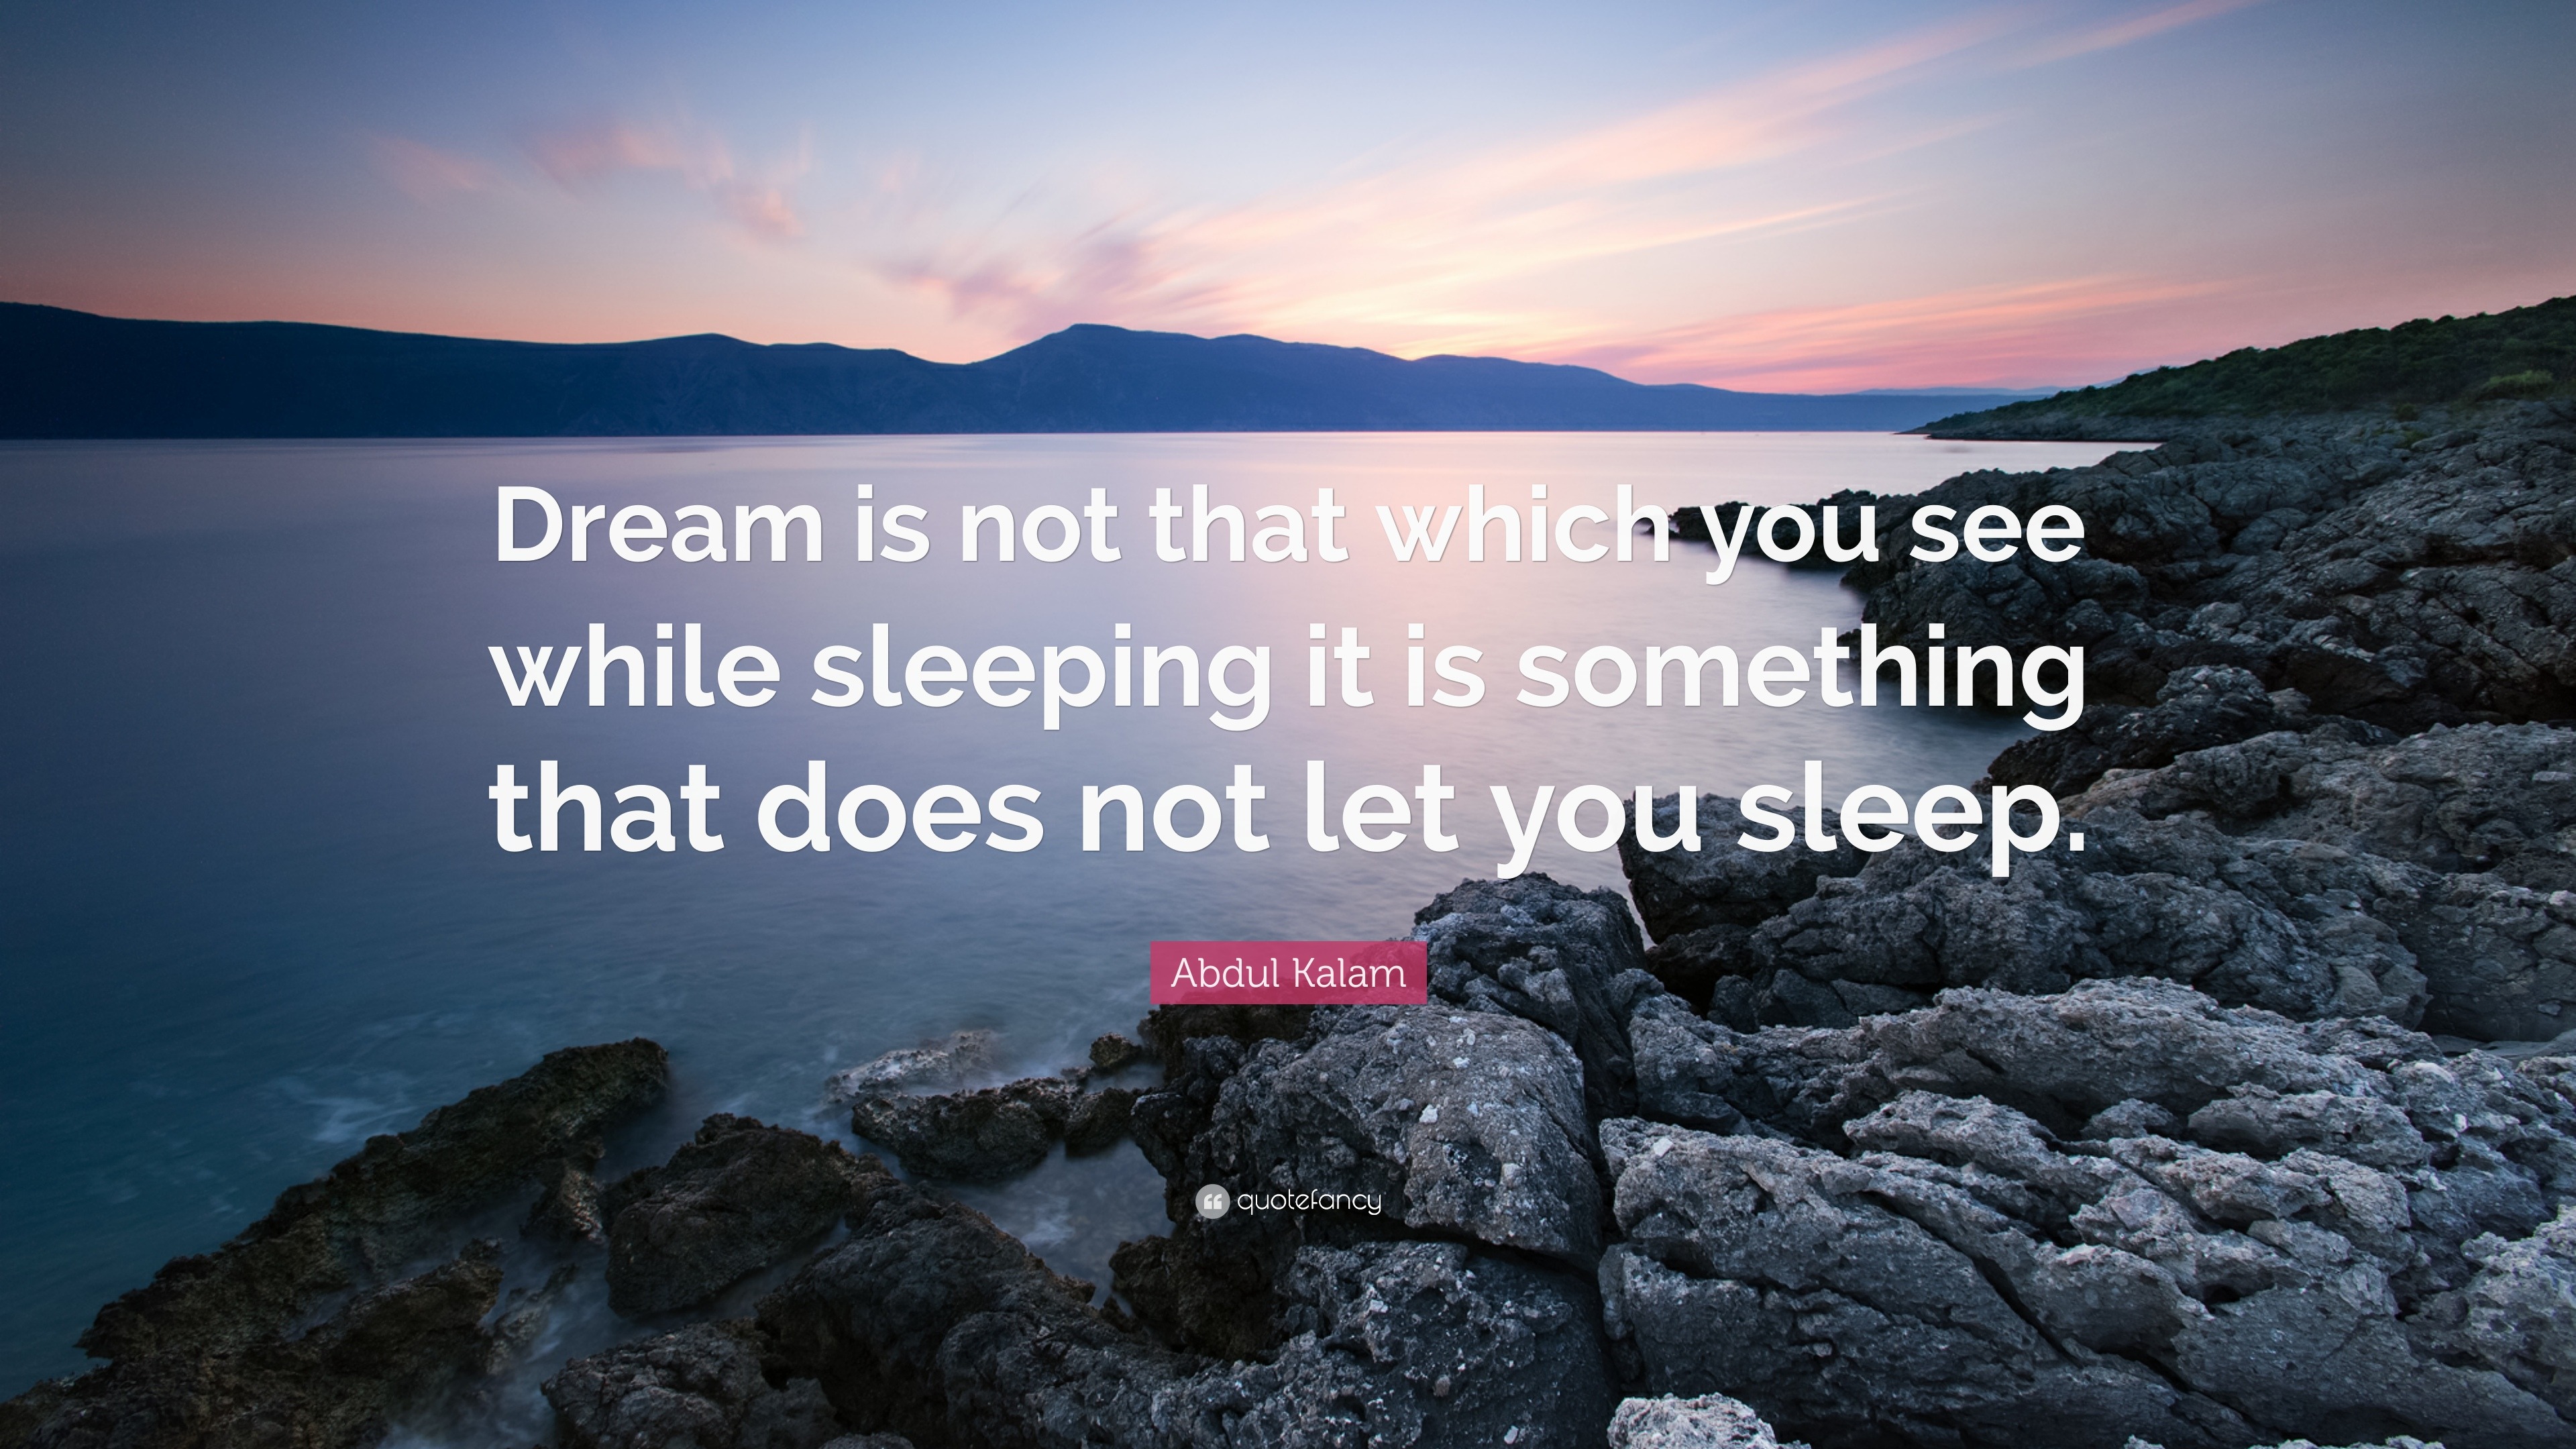 essay on dreams don't allow you to sleep